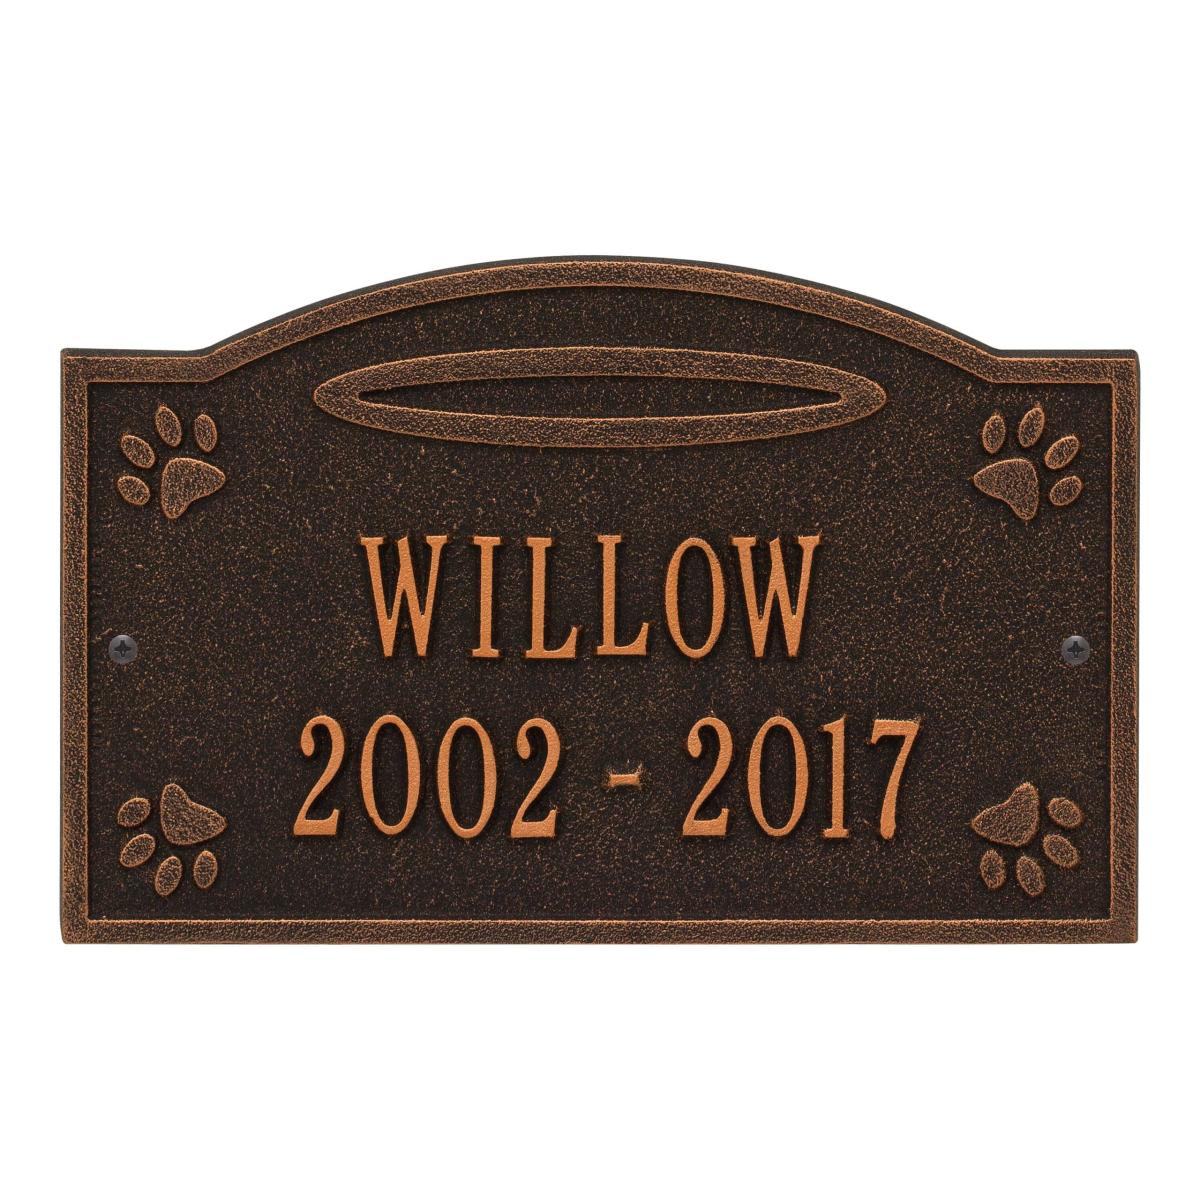 Ground oil rubbed bronze plaque finish with image of pet paws and dates